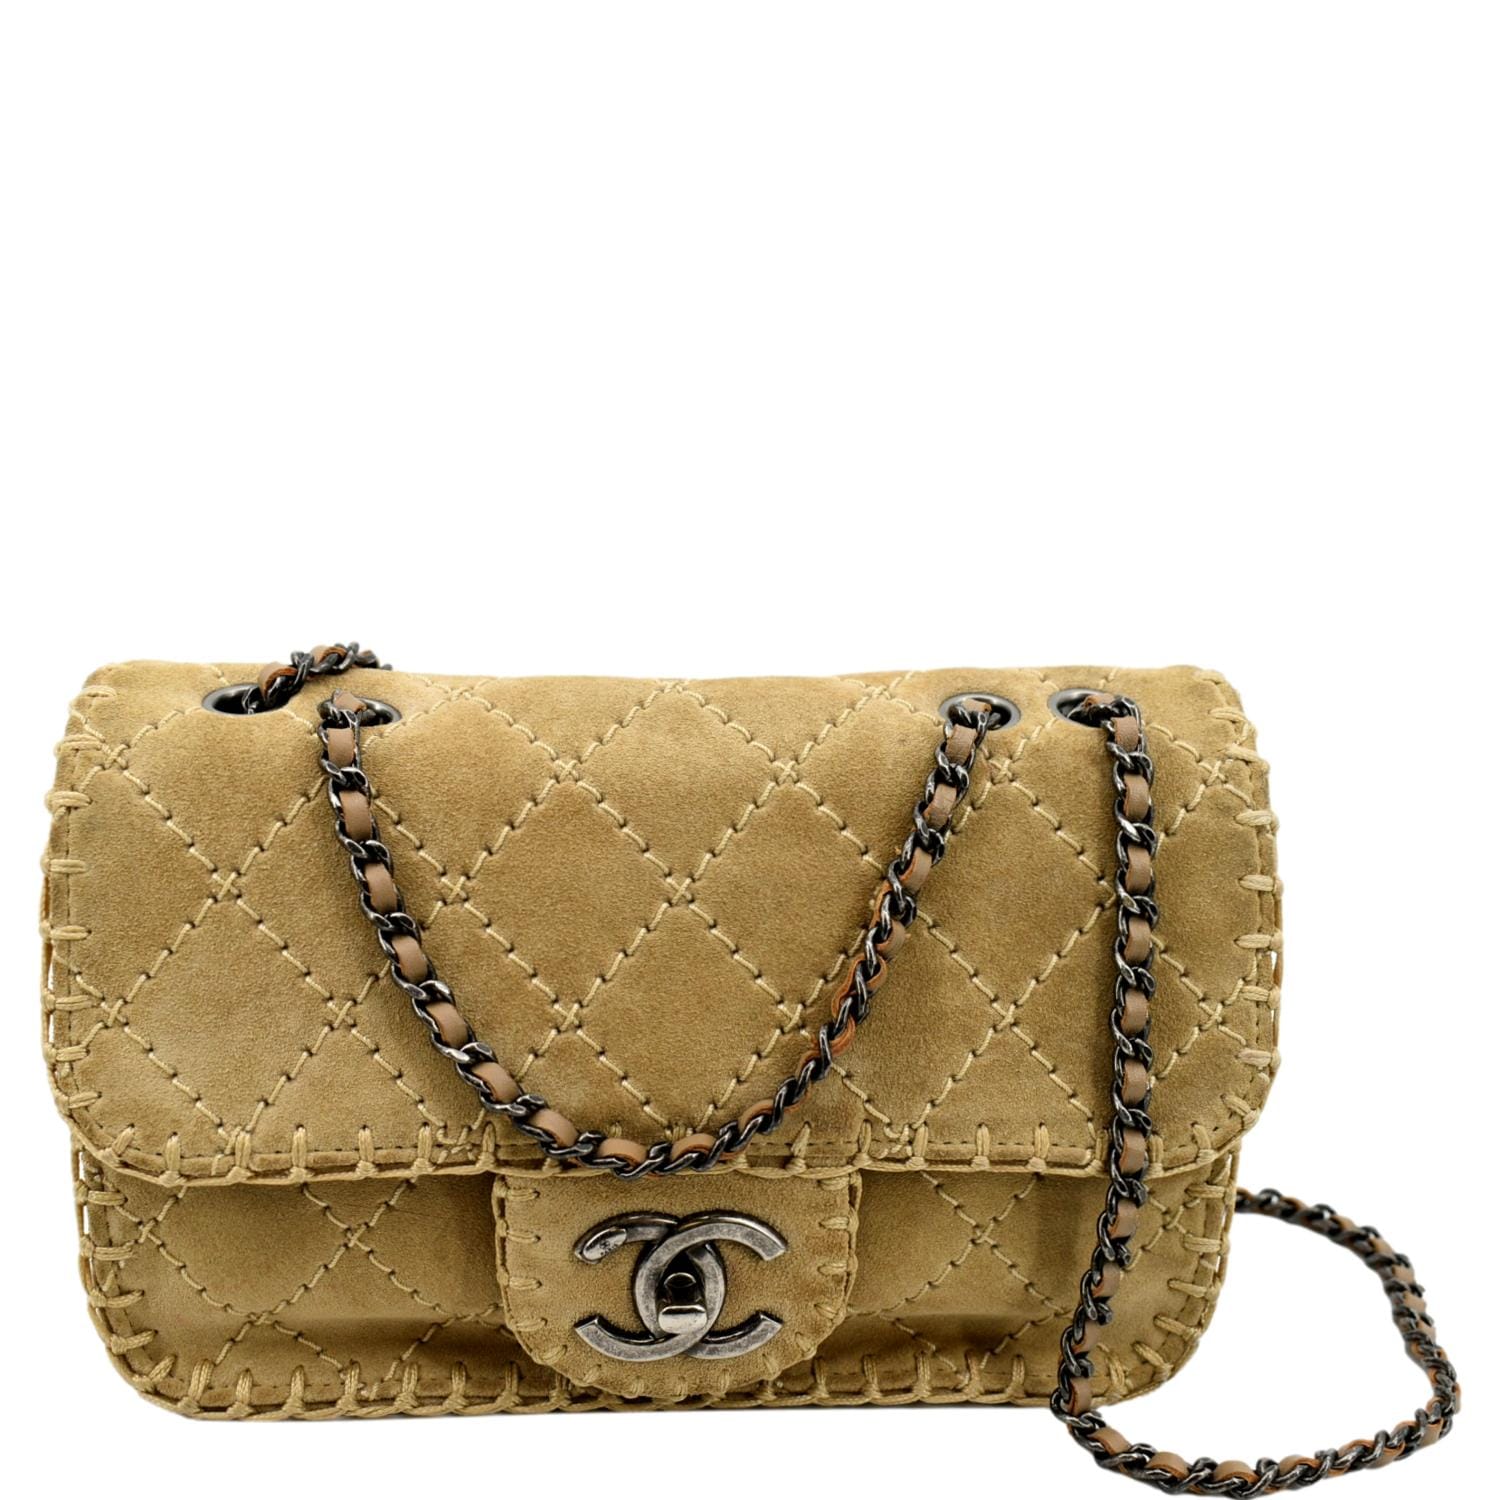 coco chanel jersey bag